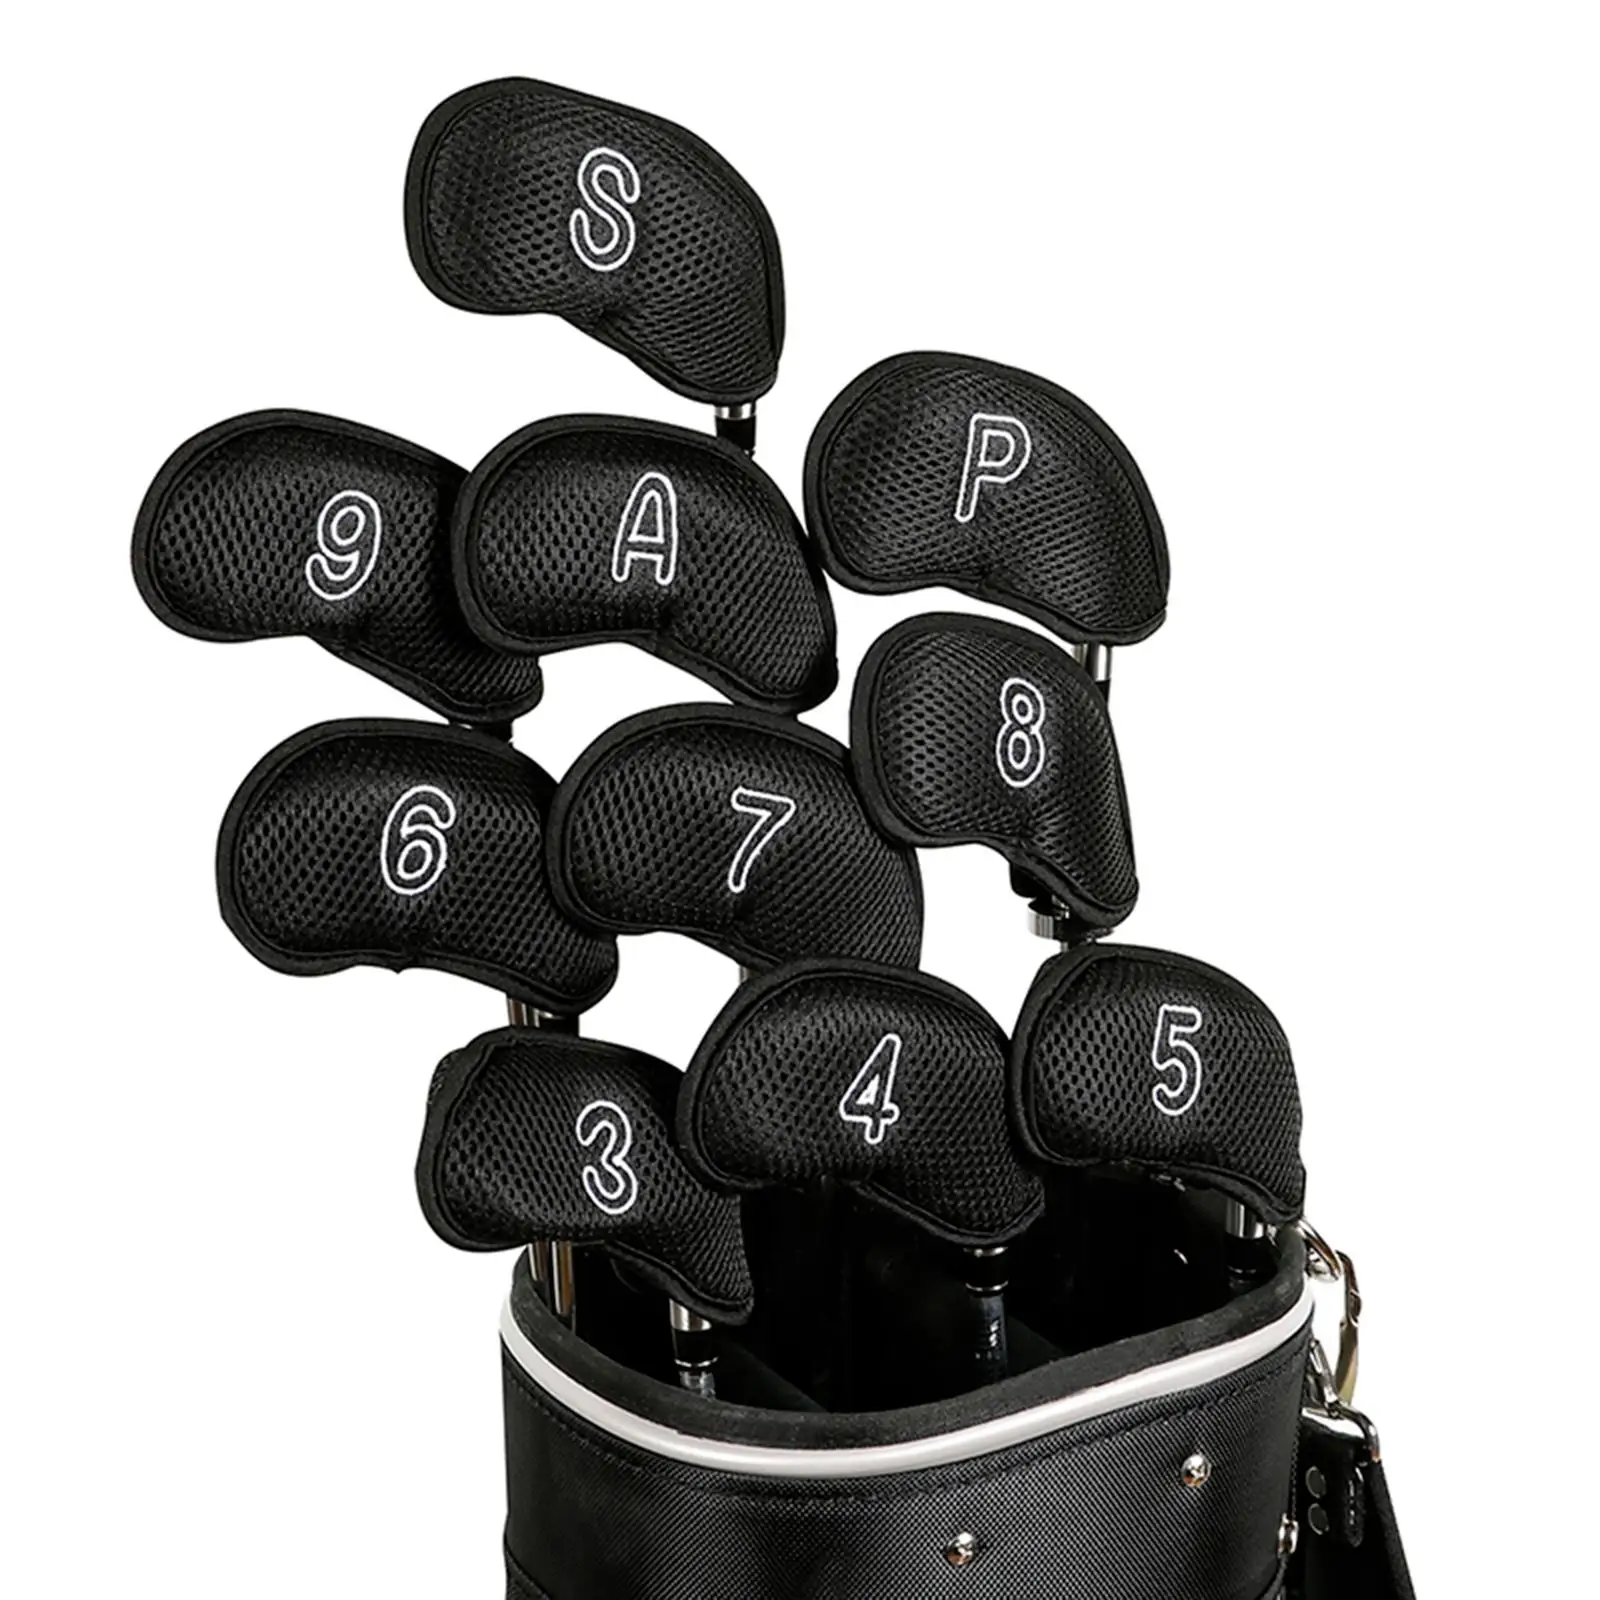 

10Pcs Meshy Golf Iron Head Covers for Golf Clubs Golf Club Protectors Travel Golf Club Covers Fit Most Brands Golf Gears